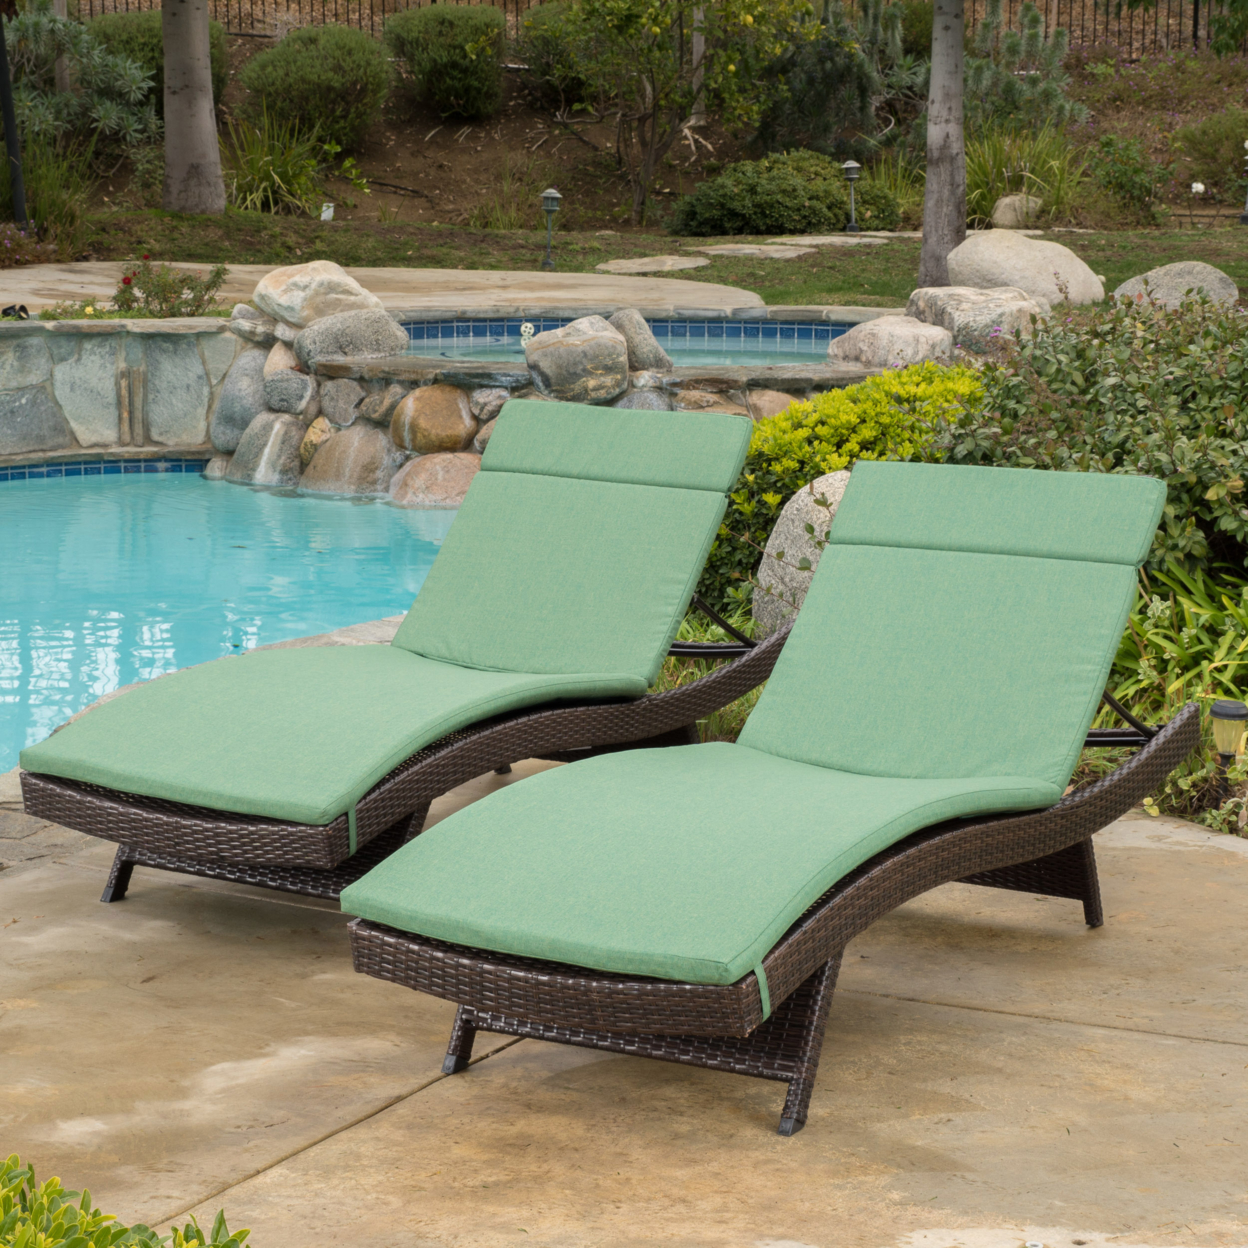 Lakeport Outdoor Adjustable Chaise Lounge Chairs With Cushions (set Of 2) - Jungle Green Cushion